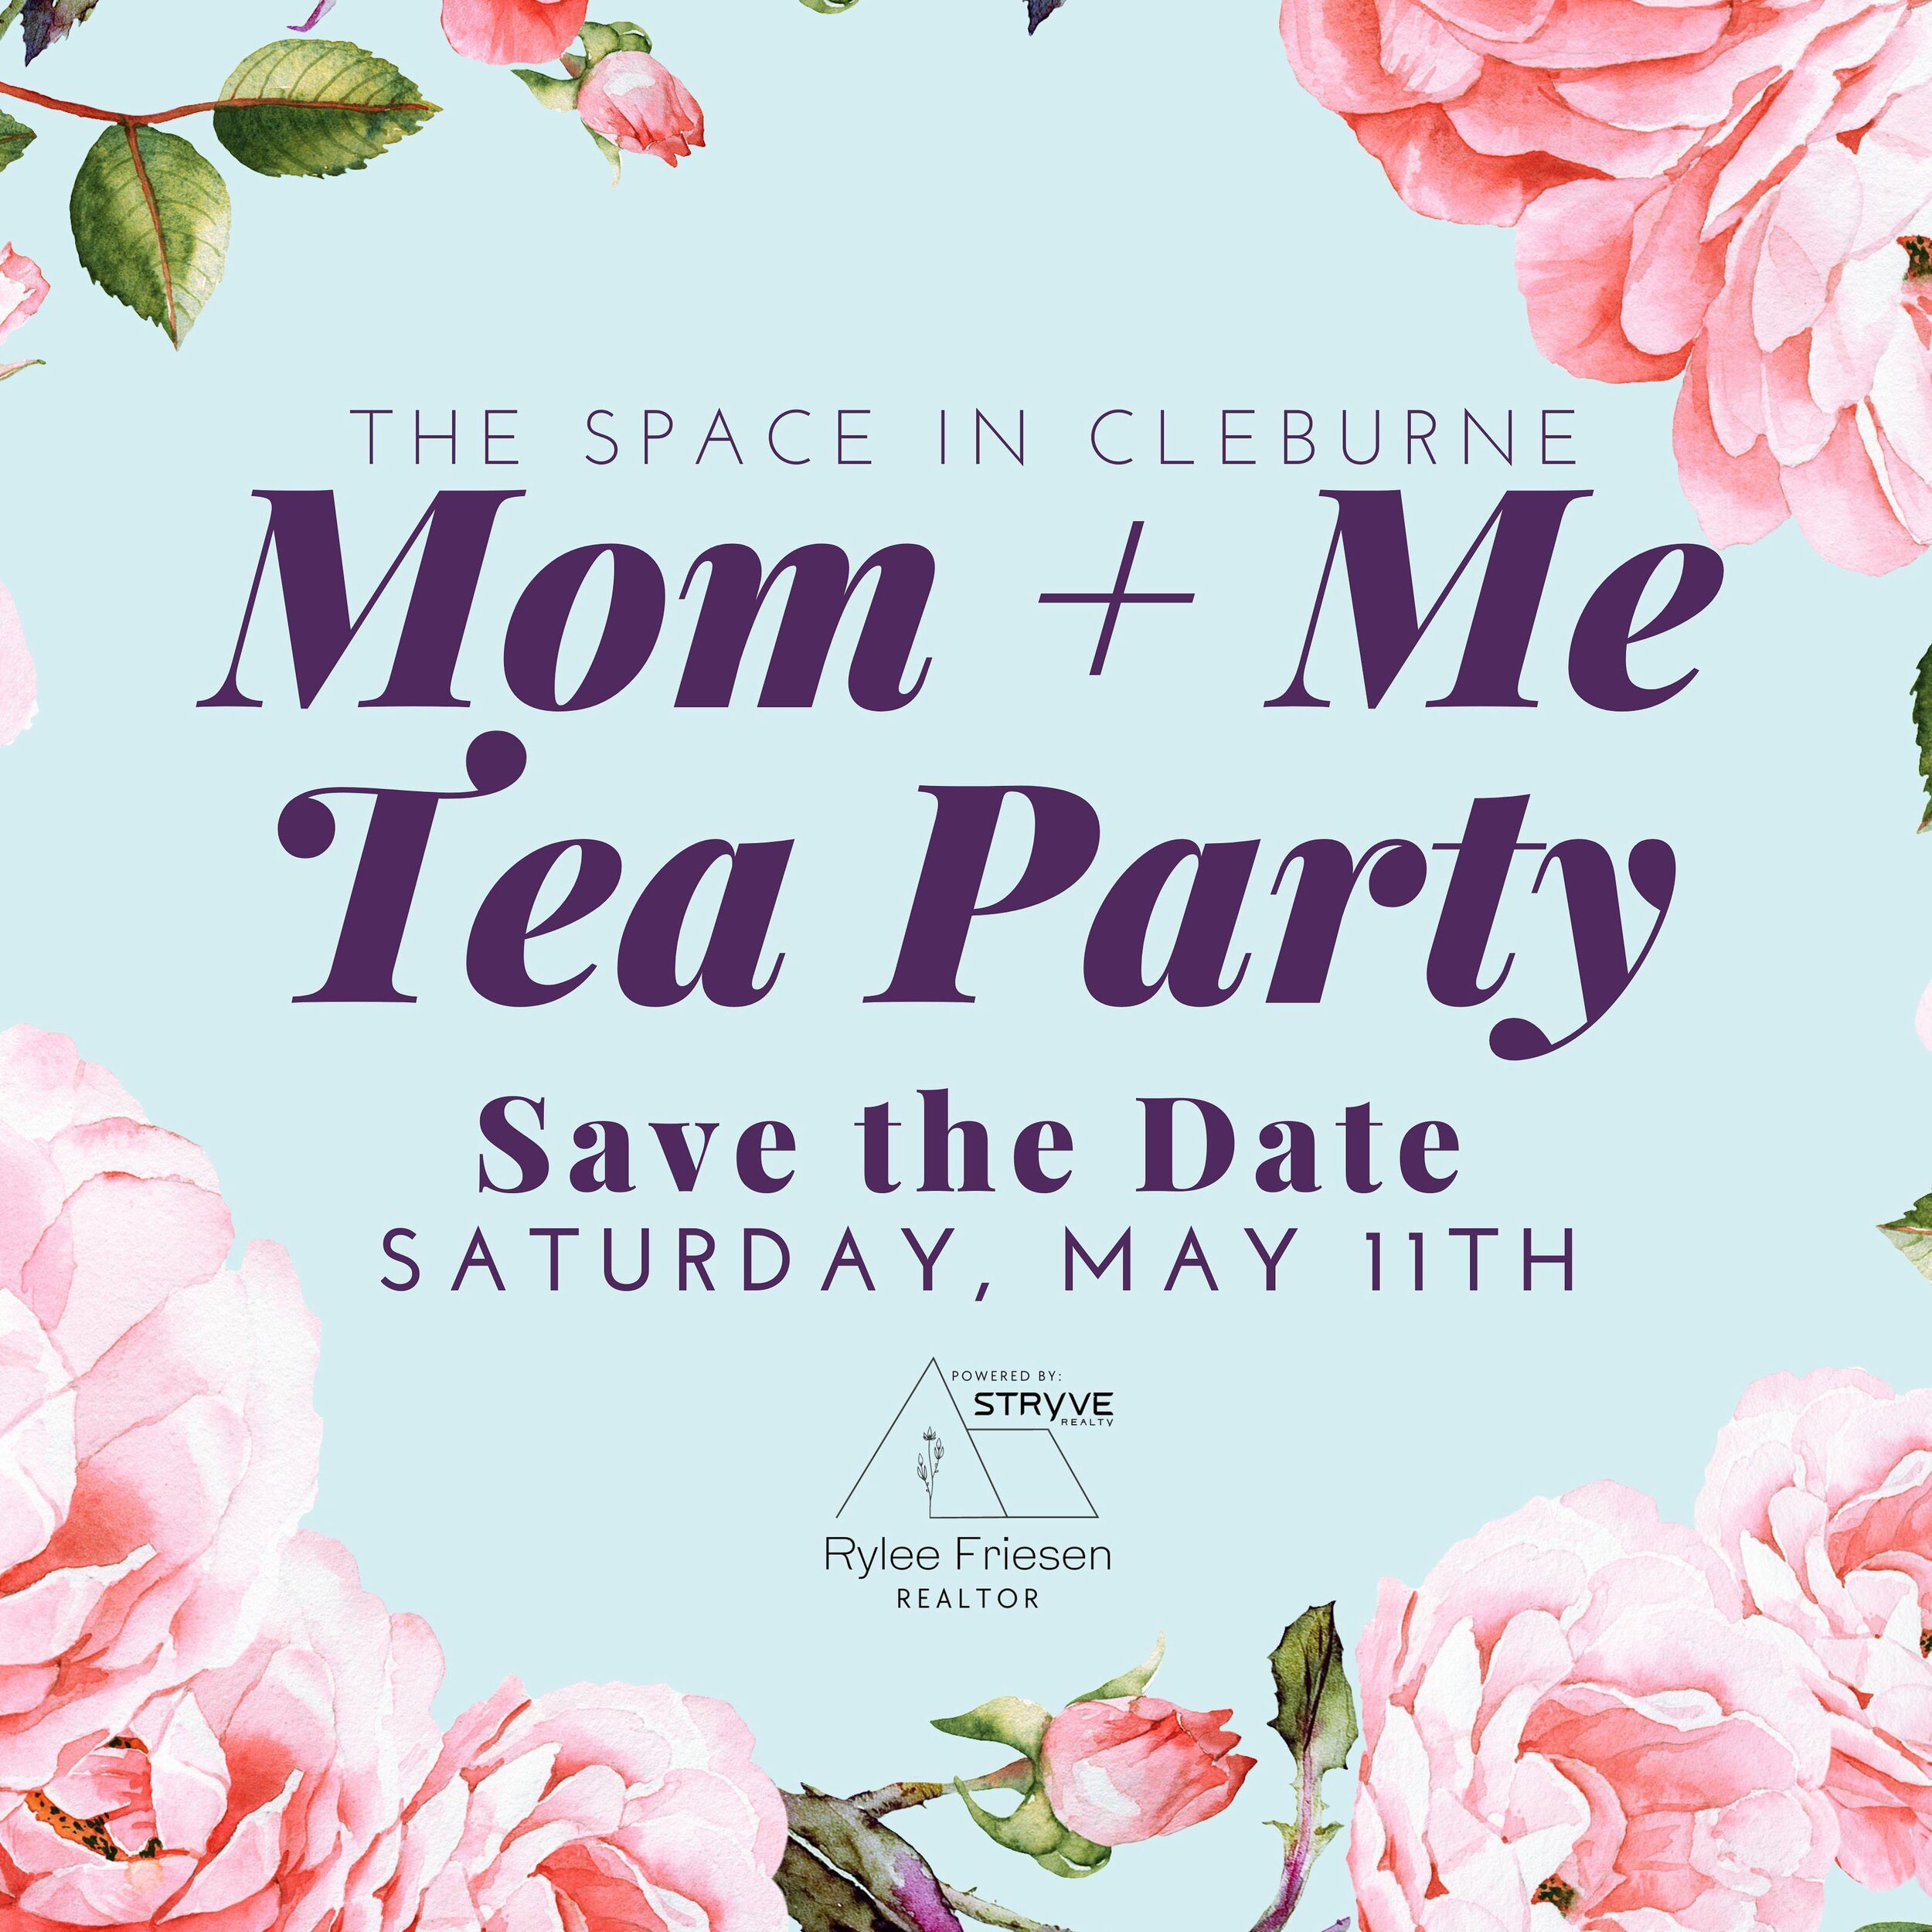 Save the Date! 

We&rsquo;re thrilled to announce that the much-loved Mom + Me Tea Party is back, and it&rsquo;s going to be better than ever! ☕️🌷
Sponsored by the generous support of @ryleefriesen_realtor this event promises to be a heartwarming ce